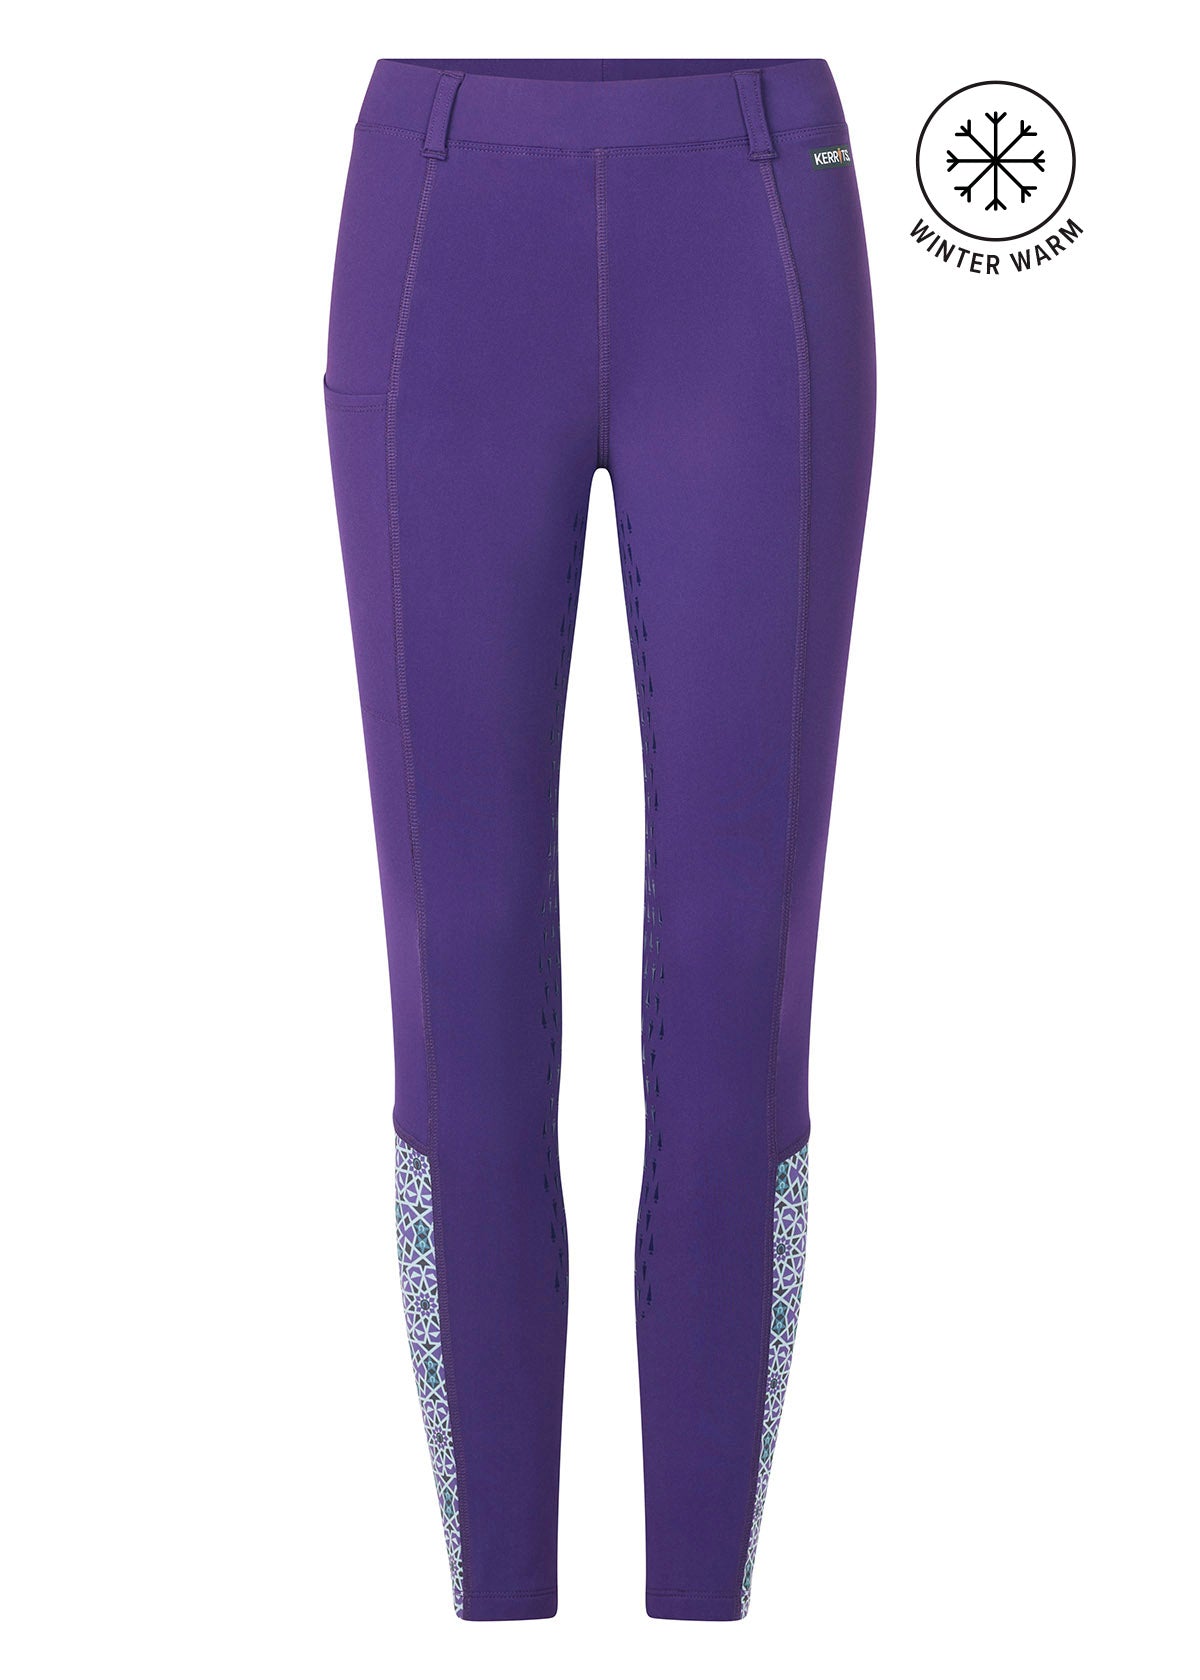 Kids Winter Breeches and Riding Tights – Kerrits Equestrian Apparel